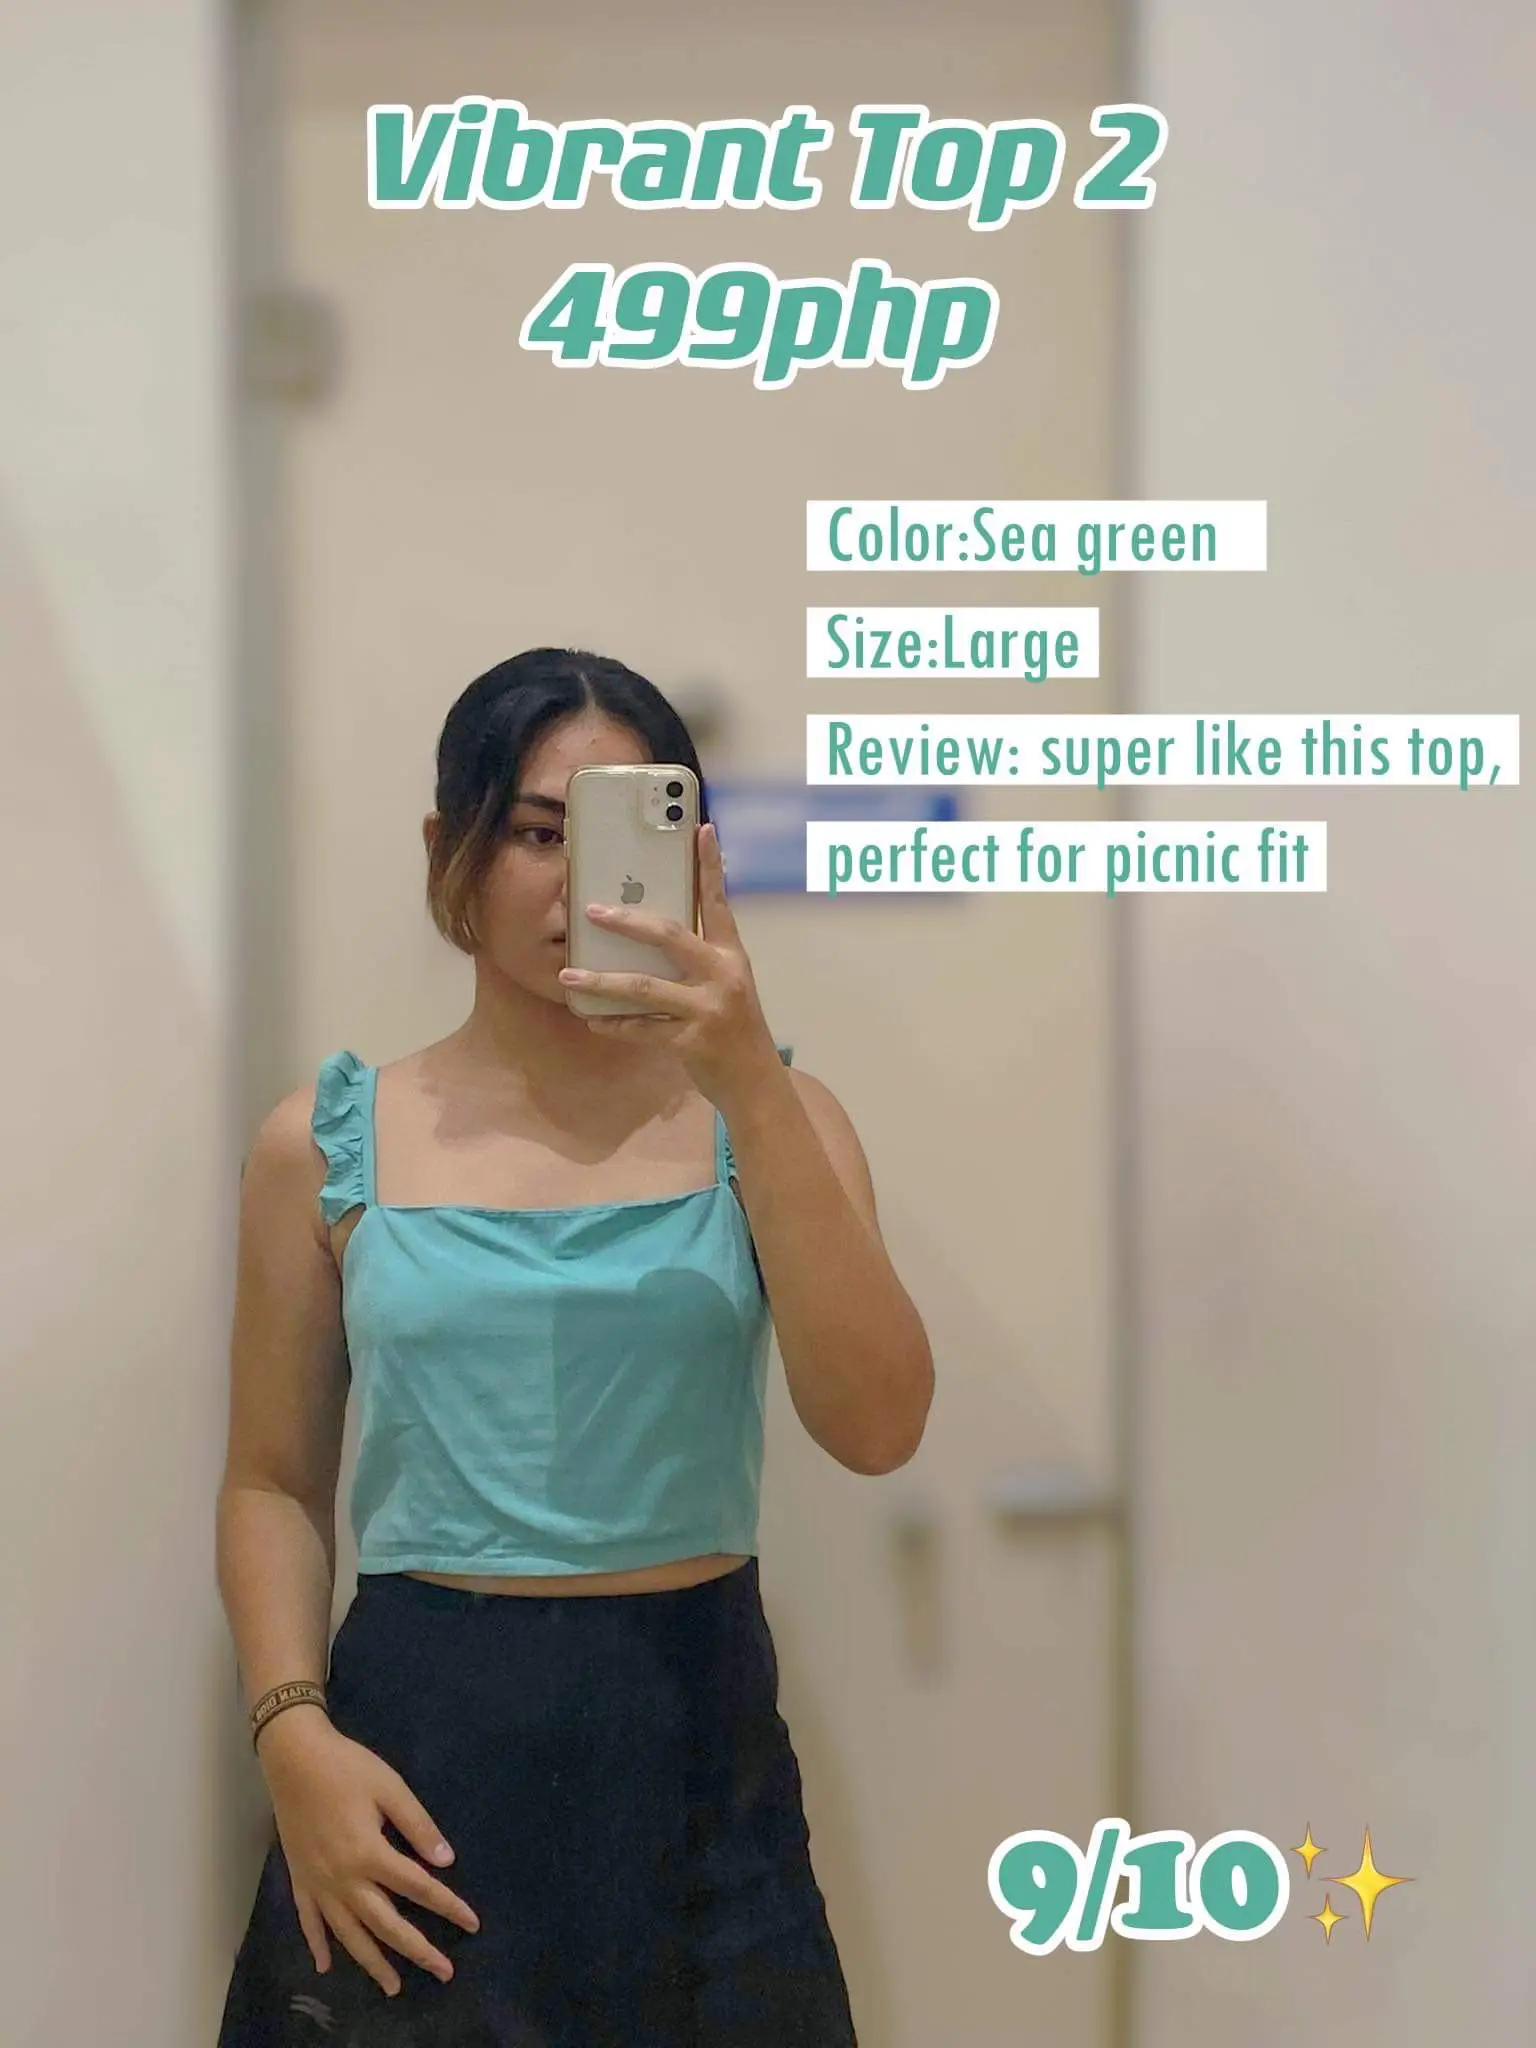 UNIQLO TRY ON & REVIEW DRESS VERSION, Gallery posted by Alea Bianca